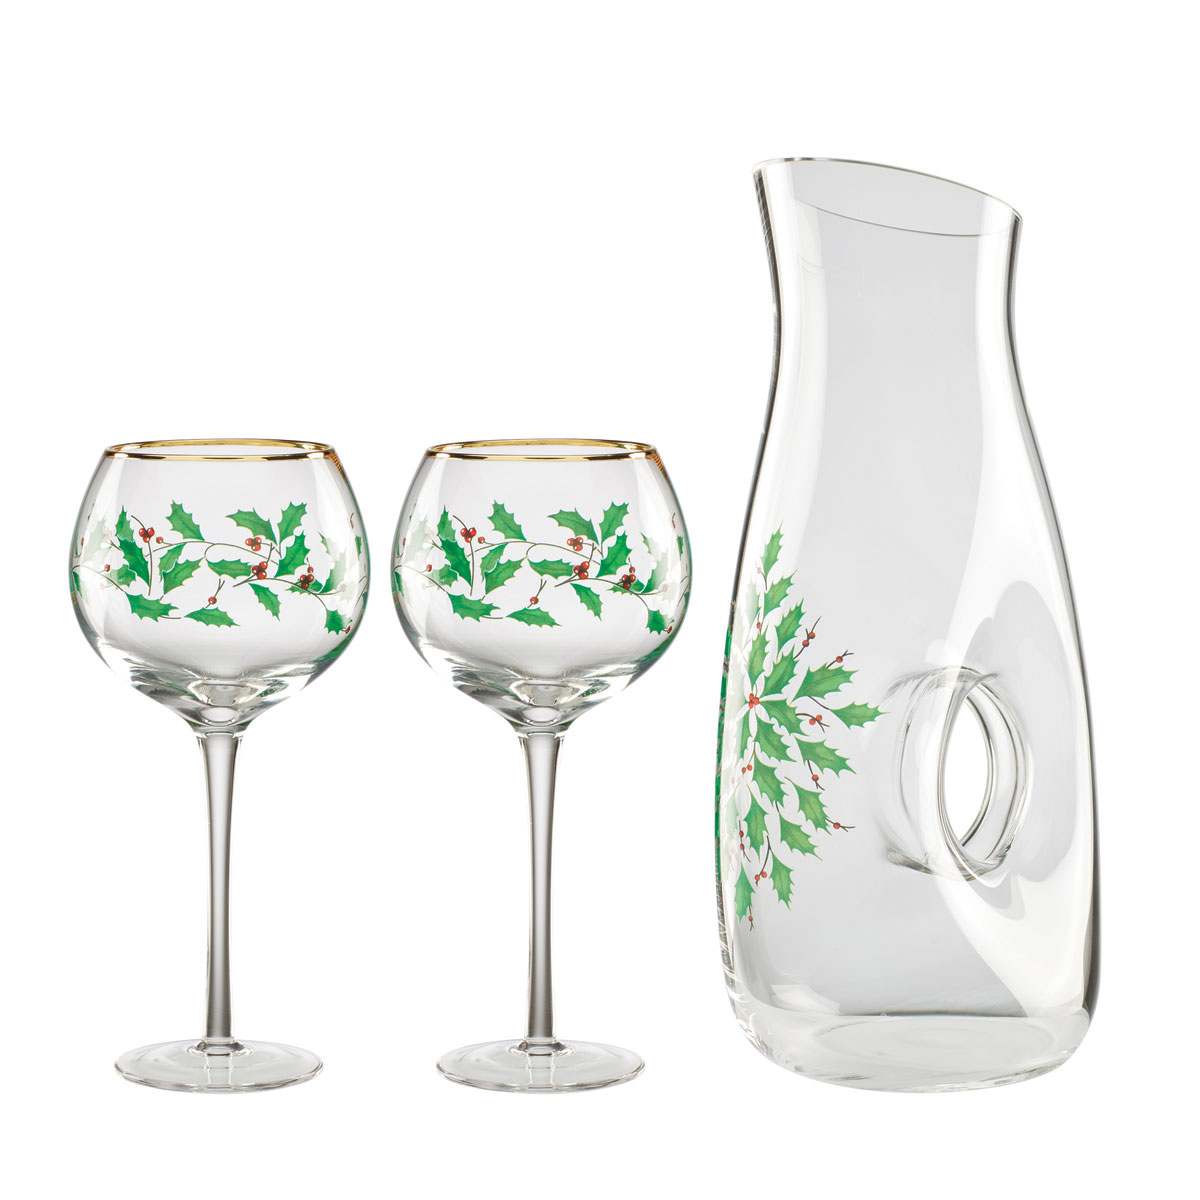 Lenox Holiday Glassware Decal 3 Piece Bar Set, Decanter and 2 Wine Balloon Glasses